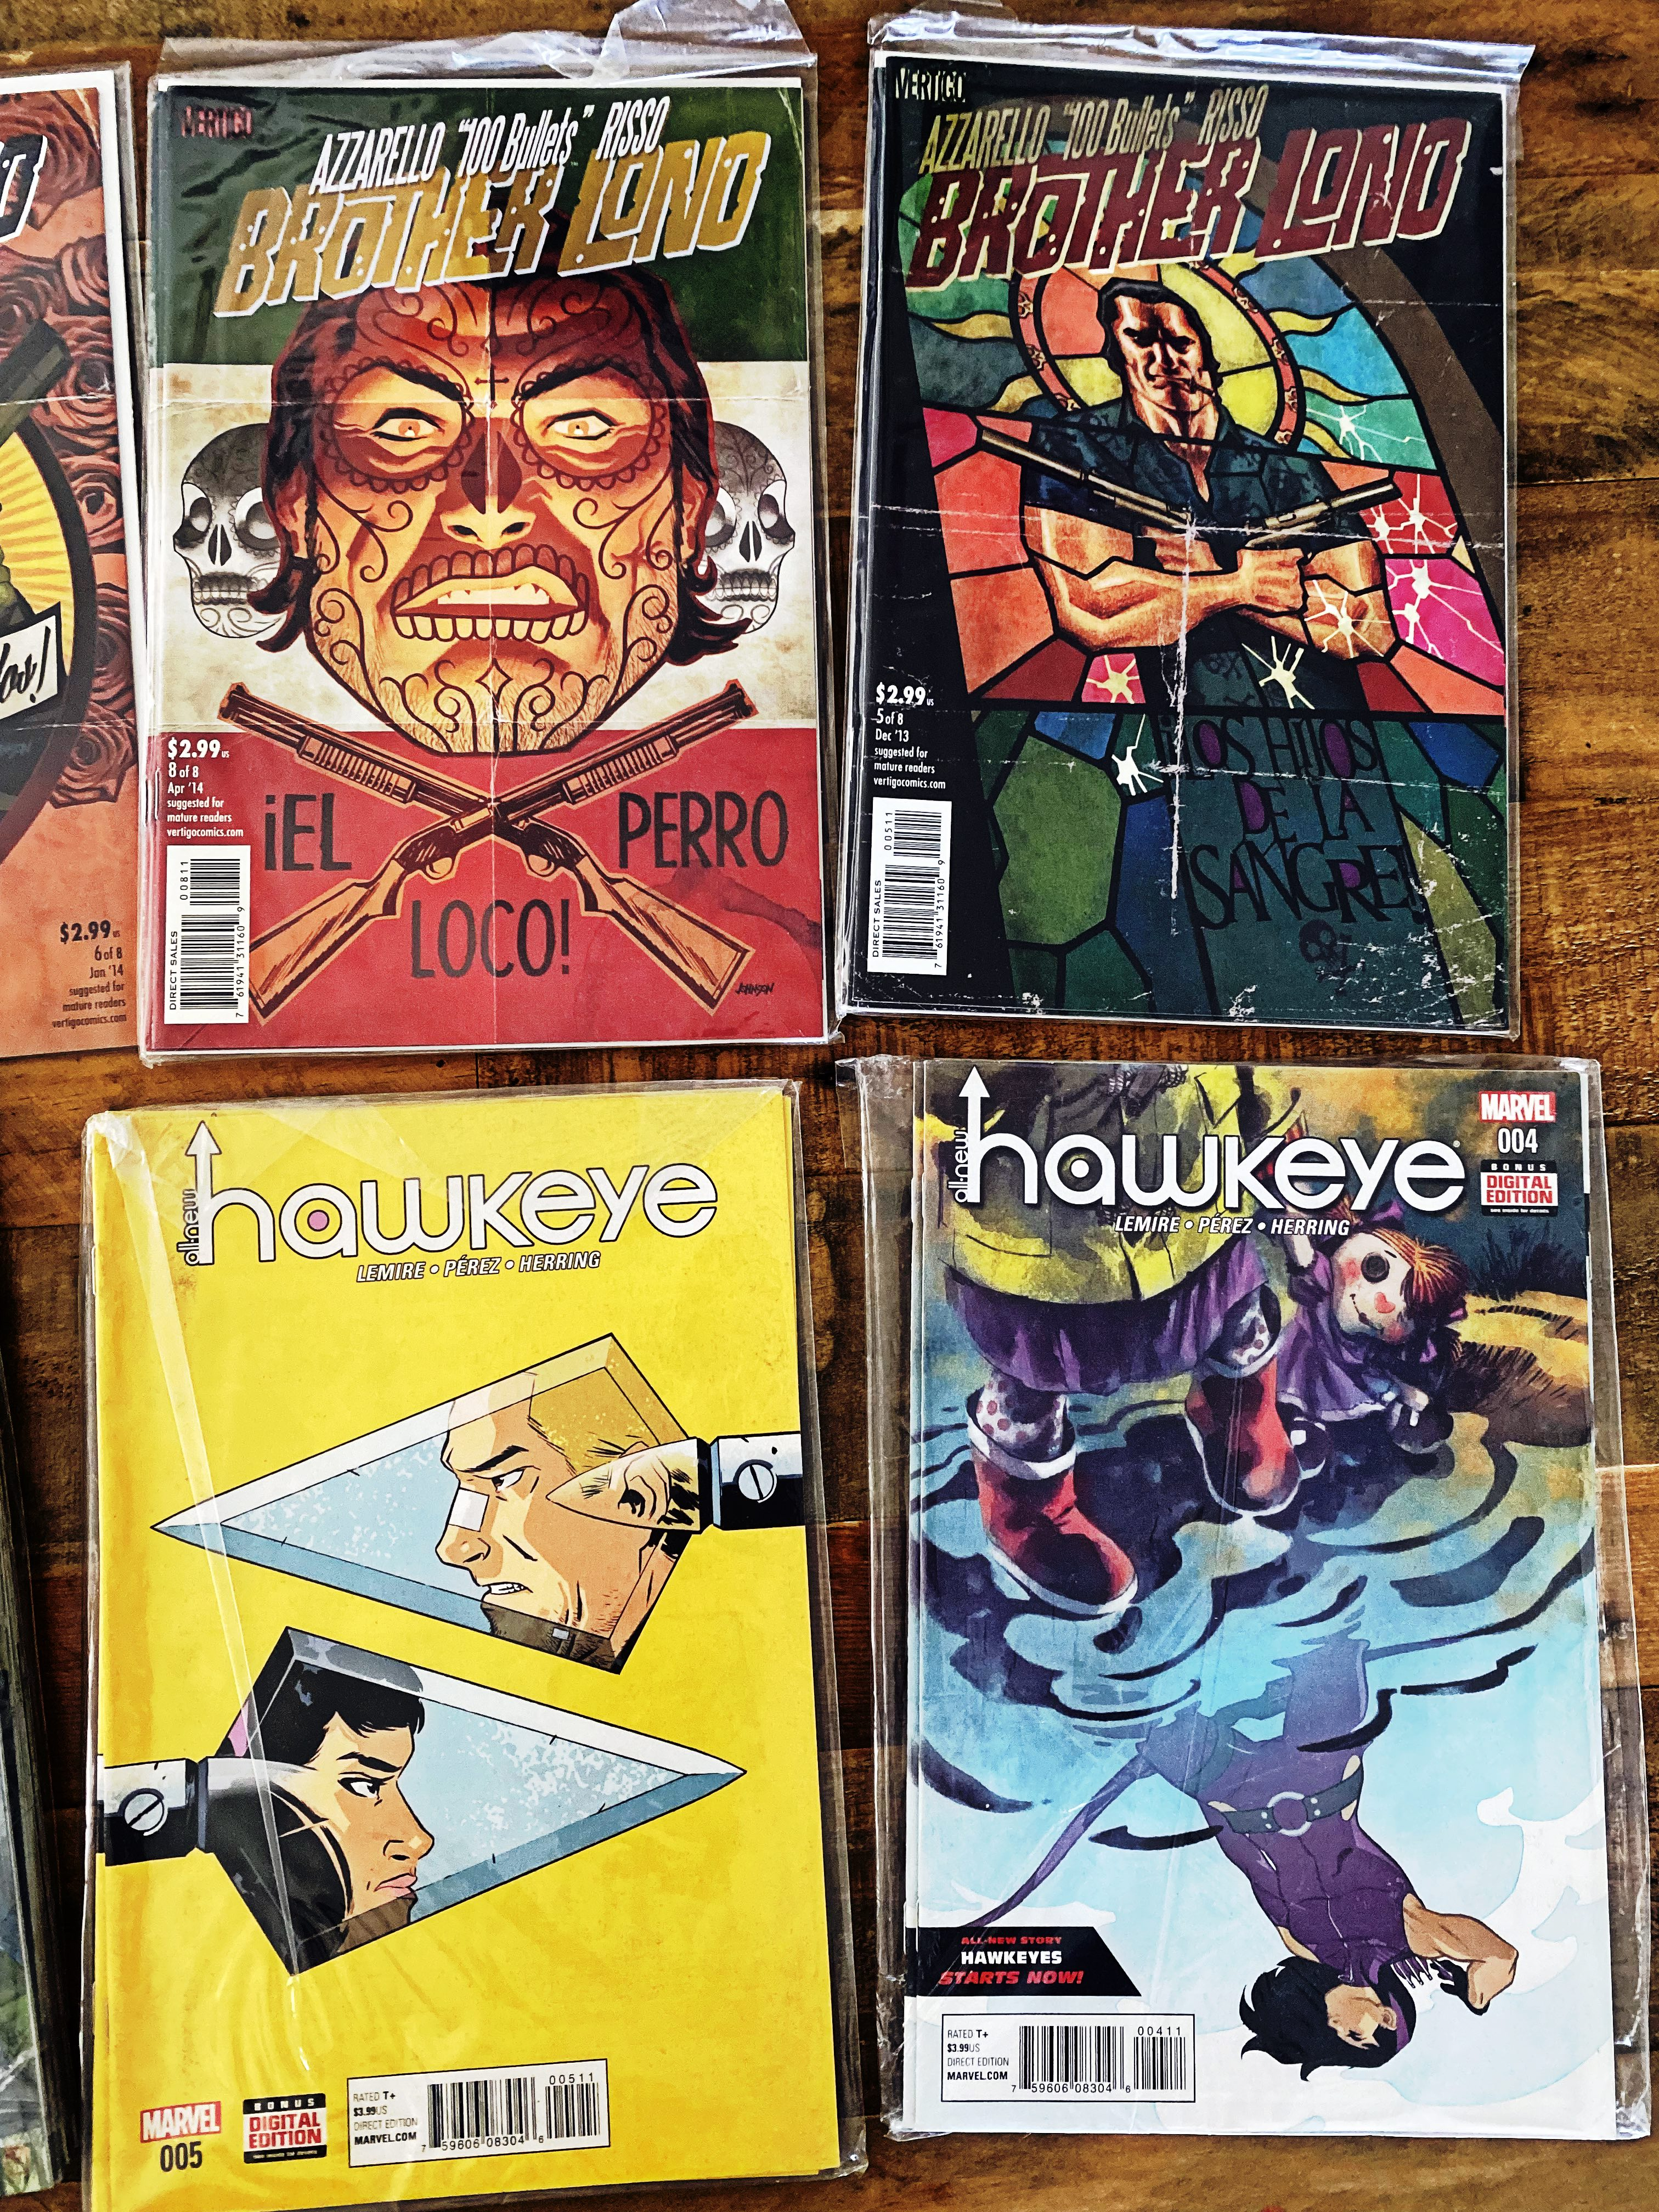 Comic book Brother lond Sandman Hawkeye collection lot 23 NEW VF